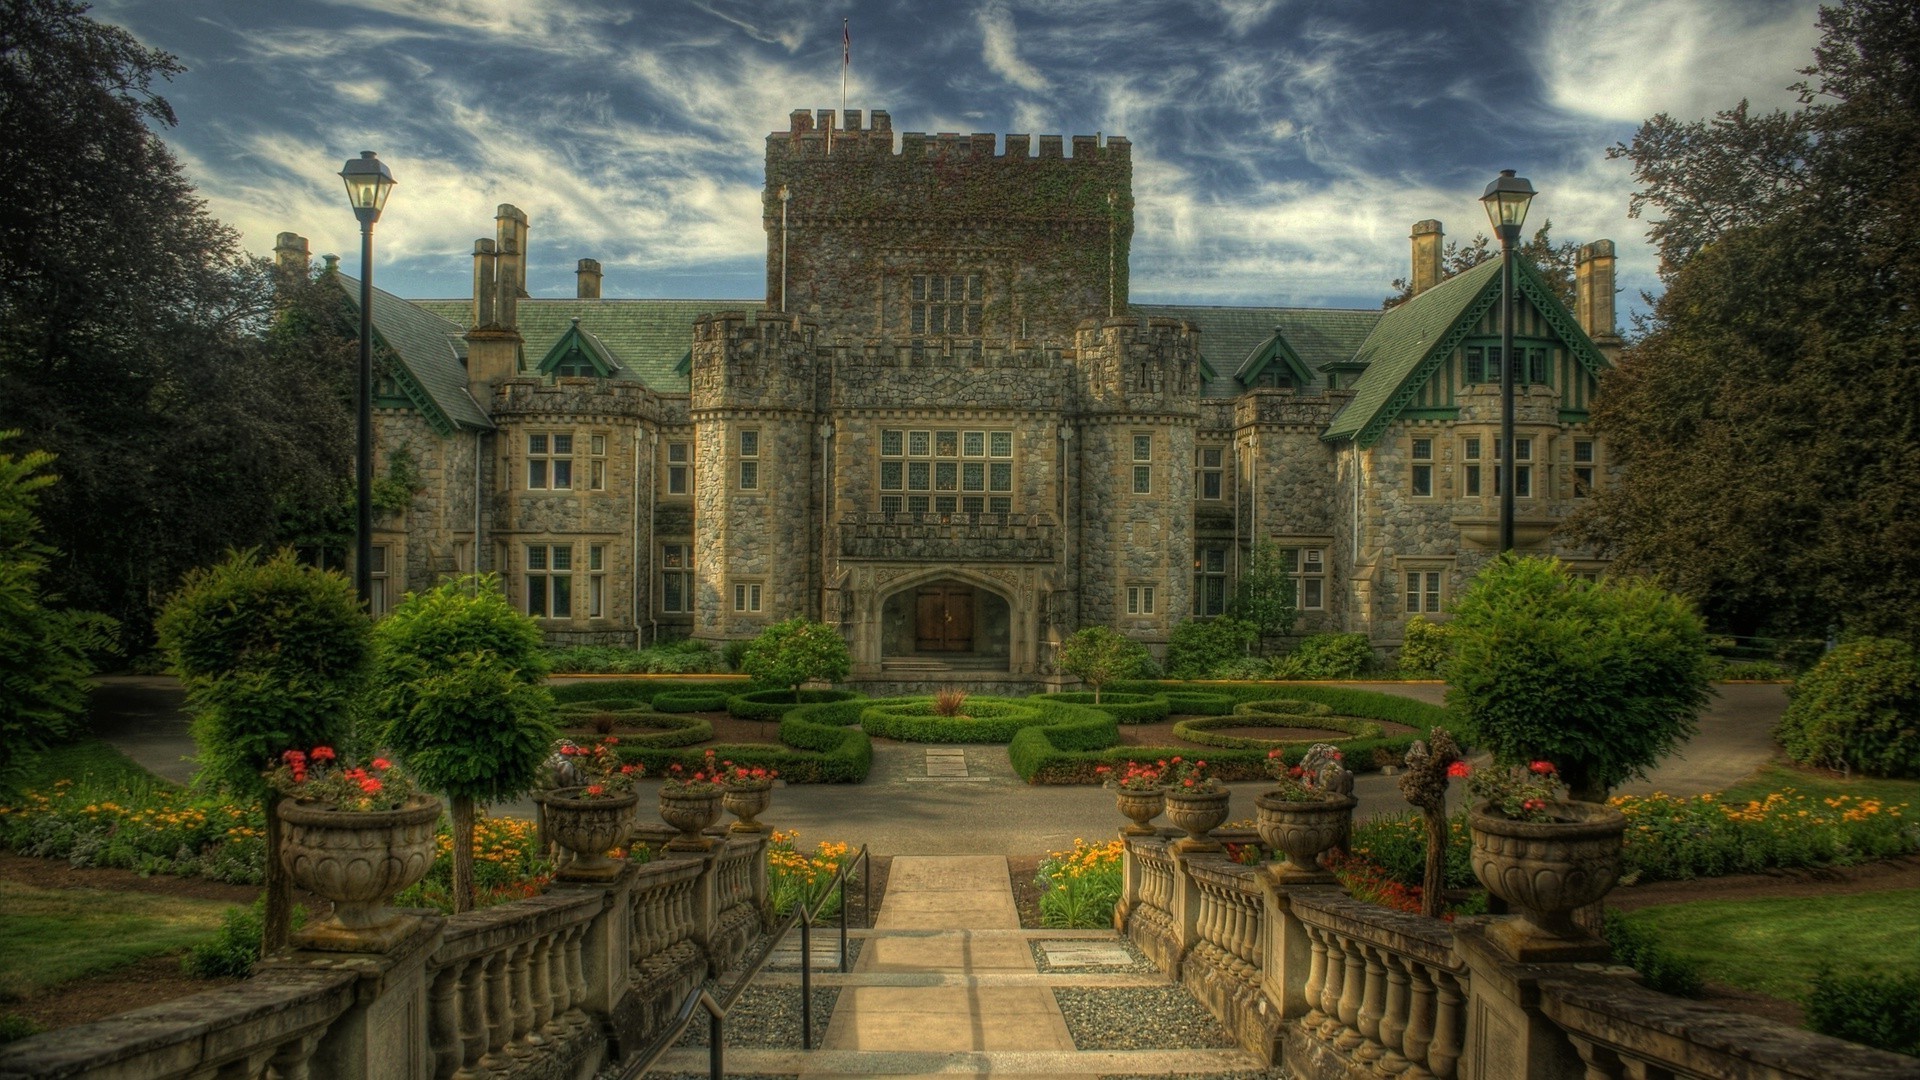 architecture, Castle, Trees, Canada, HDR, Park, Clouds, Flowers, Fence Wallpaper